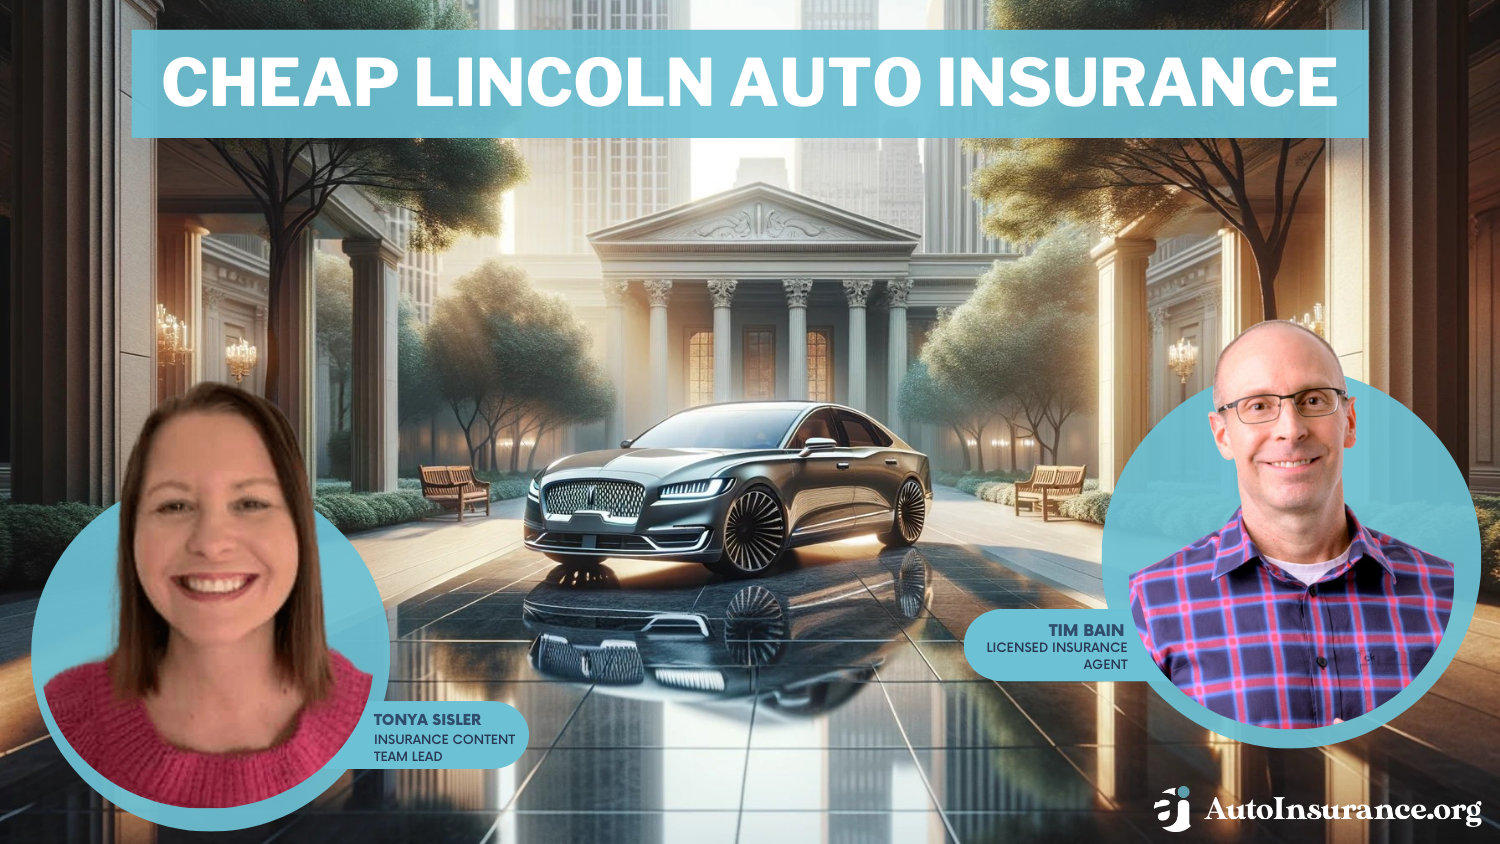 Cheap Lincoln Auto Insurance - AAA, State Farm, Travelers